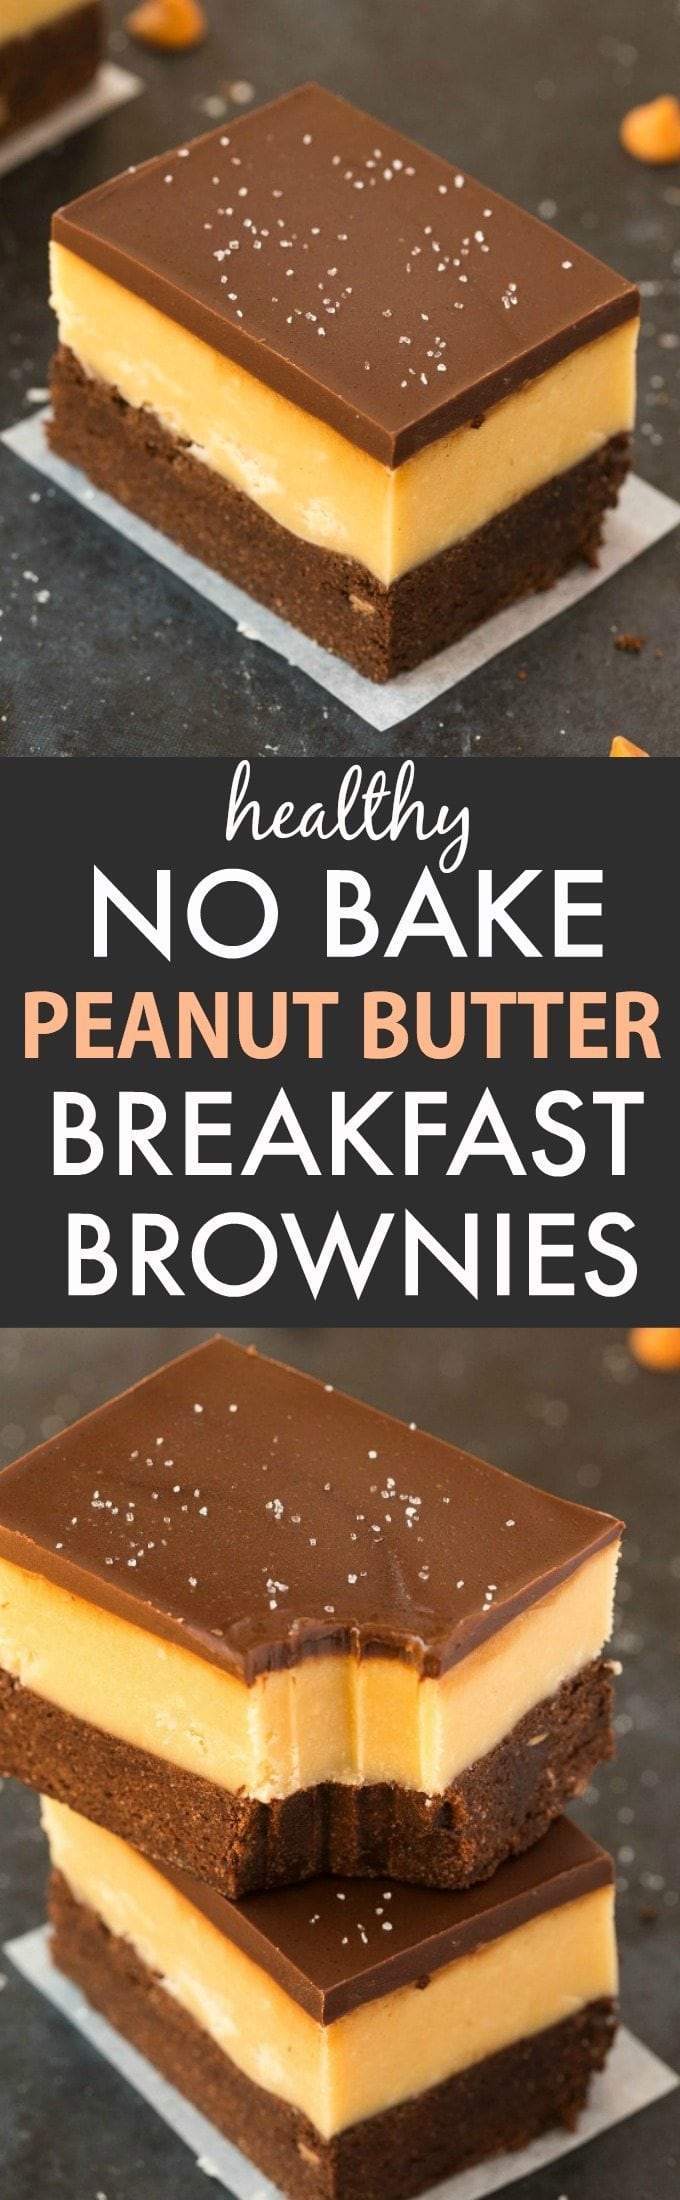 Healthy No Bake Peanut Butter Breakfast Brownies (V, GF, P, SF)- Easy and delicious dessert-for-breakfast recipe for healthy breakfast brownies with a peanut butter fudge layer! Chocolate, peanut butter and breakfast combined! {vegan, gluten free, paleo recipe}- thebigmansworld.com